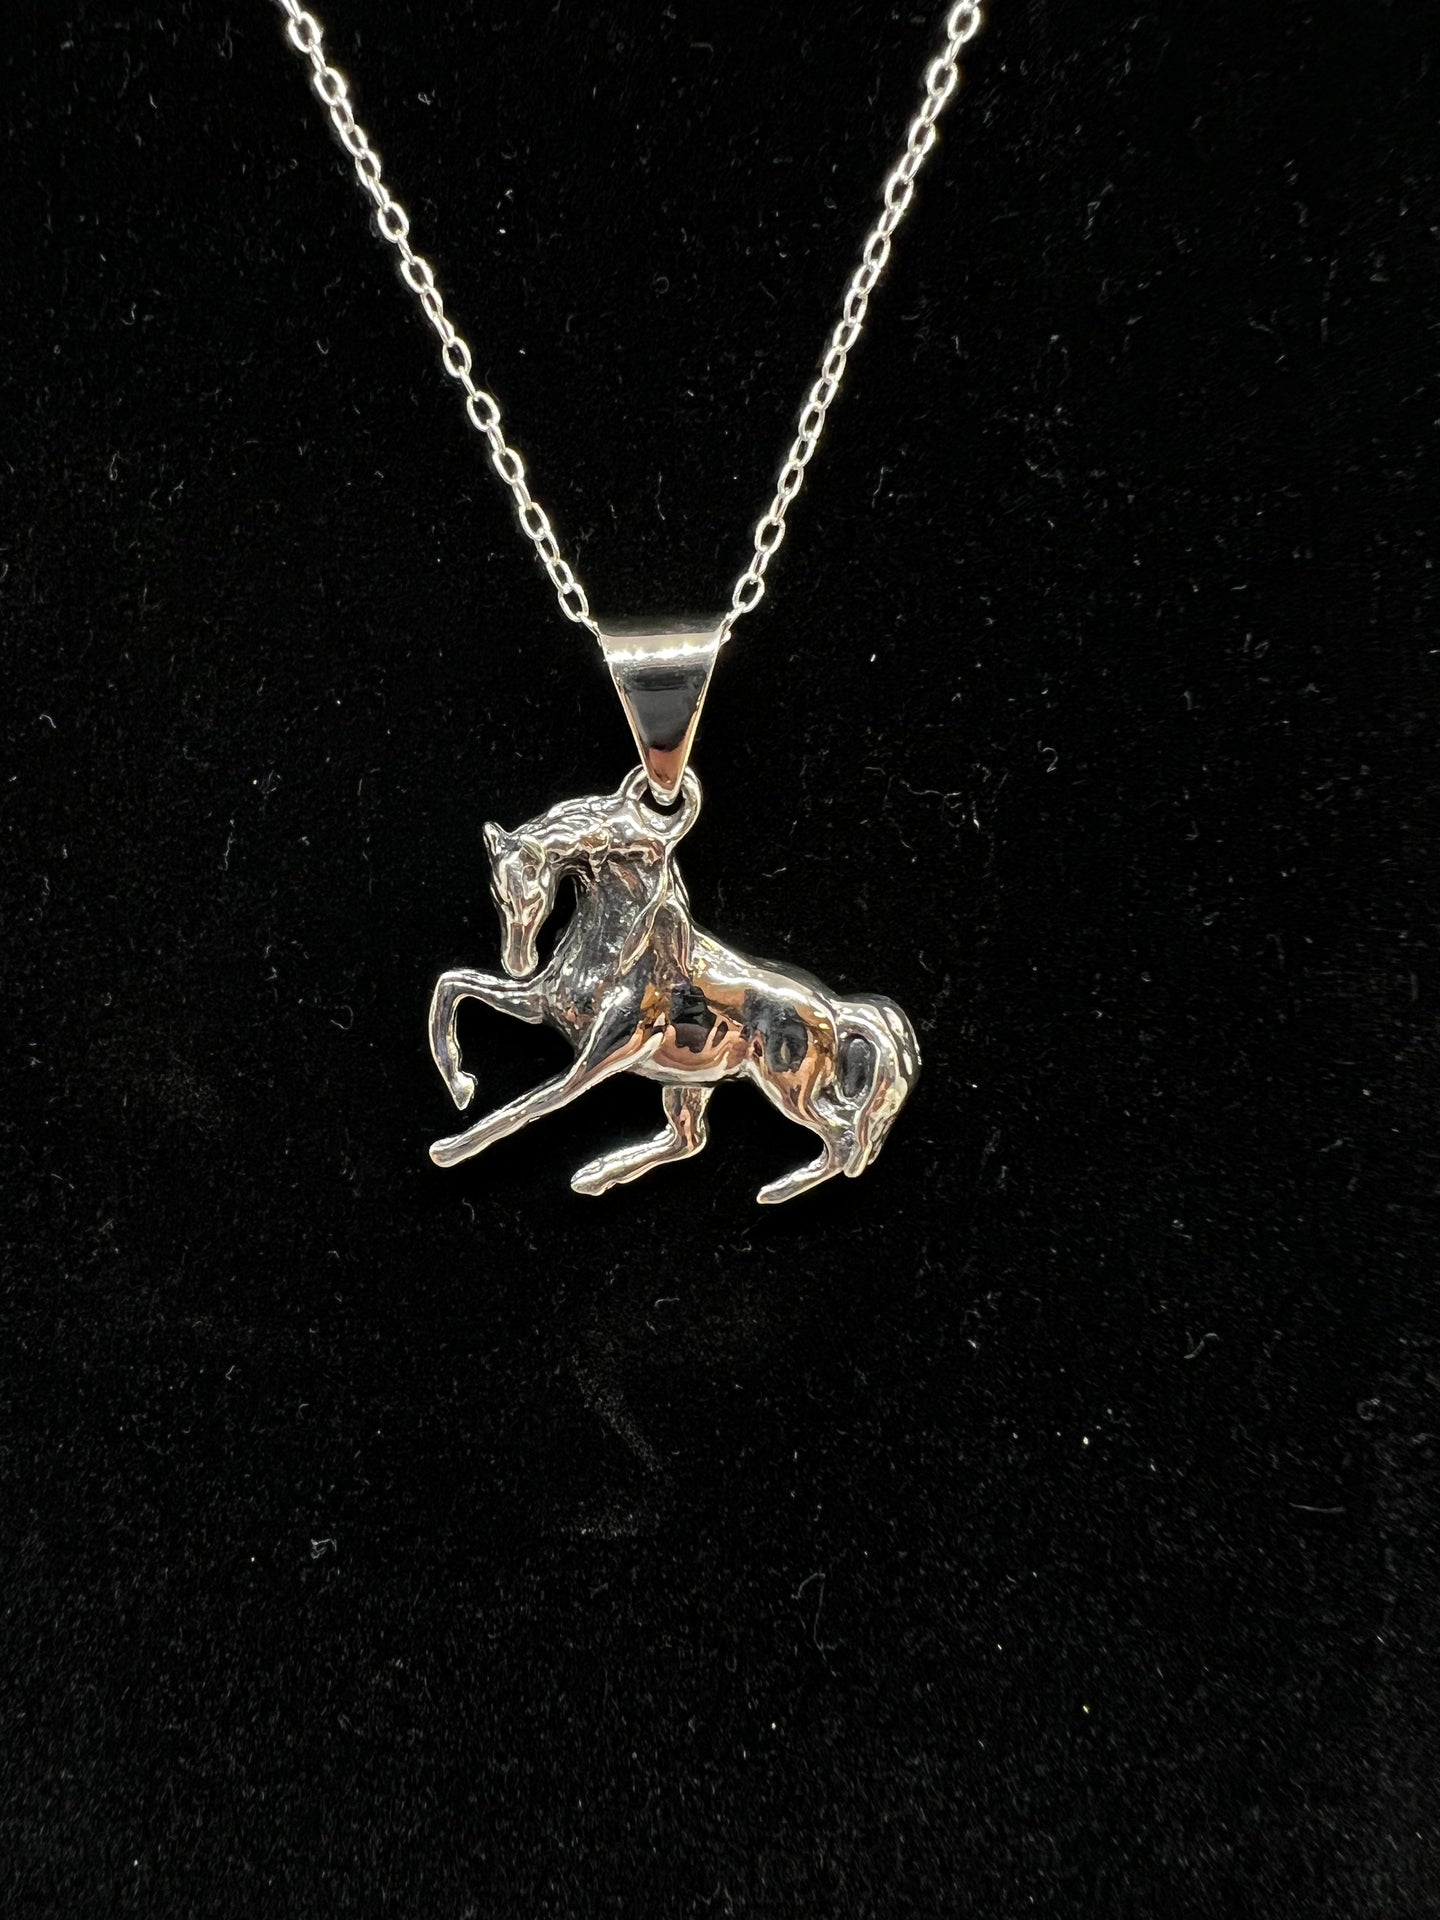 The Horse Necklace